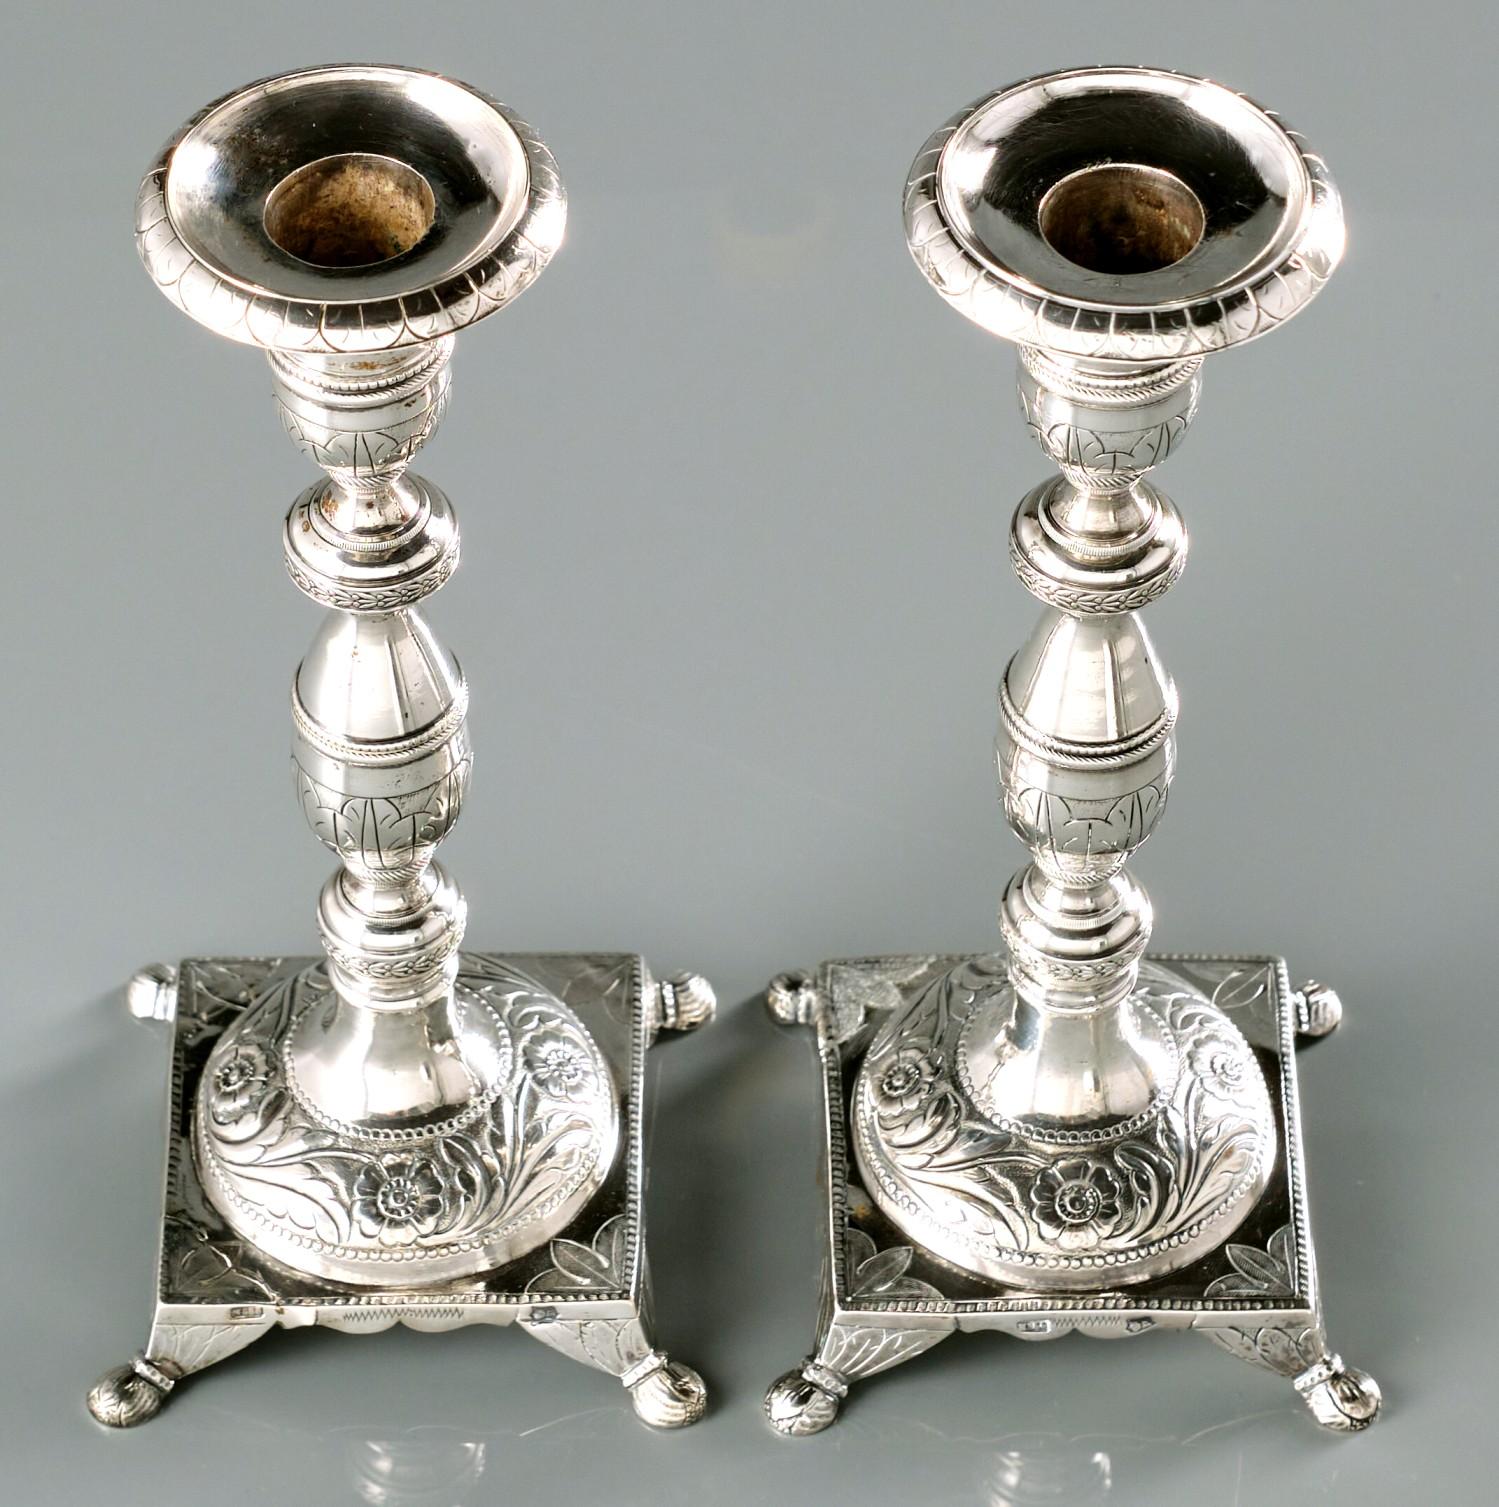 Engraved Very Good Pair of 19th Century Cast Portuguese Silver Shabbat Candlesticks